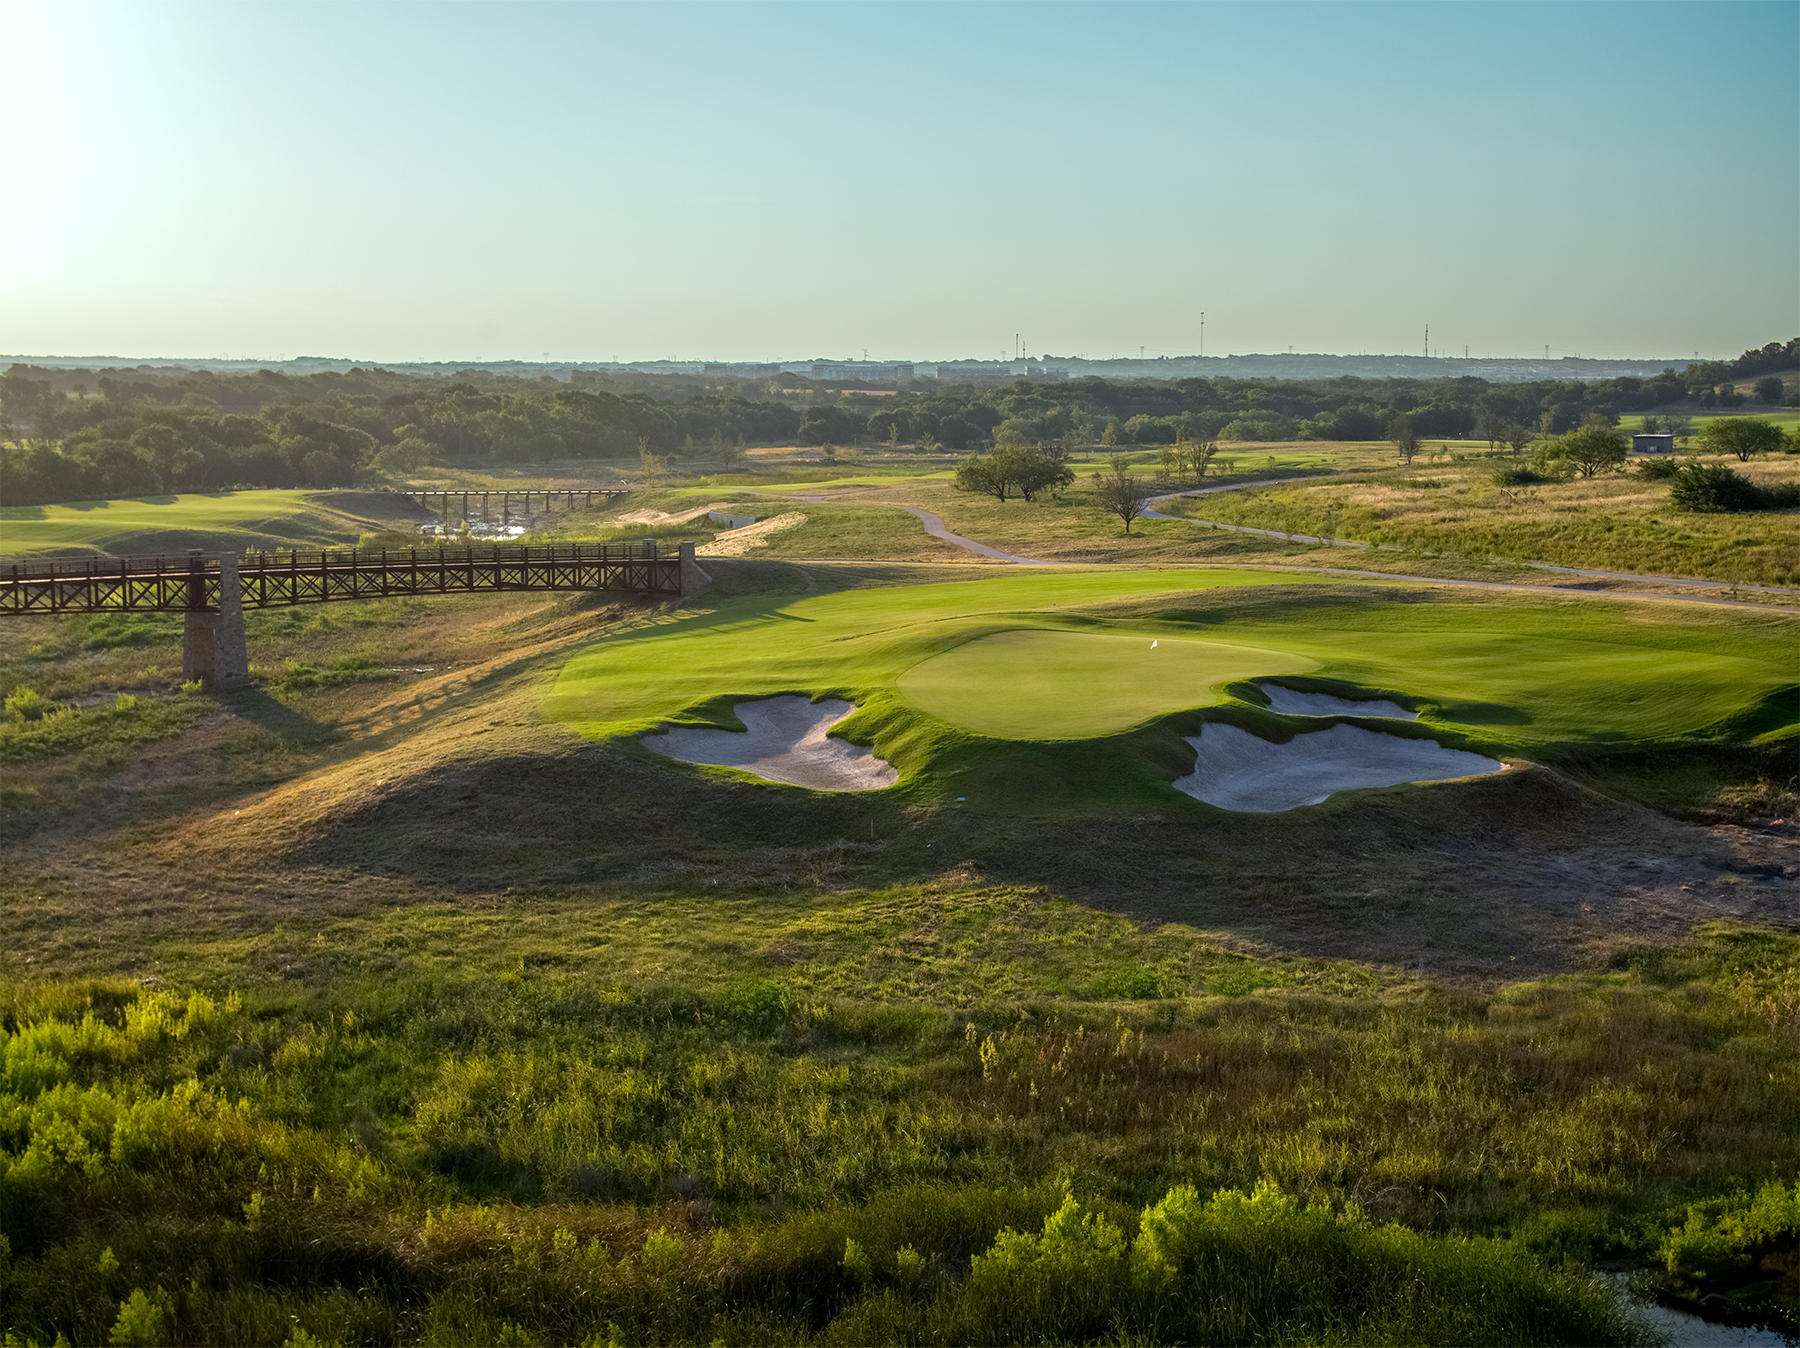 One of the challenging greens at Fields Ranch East. (Evan Schiller Photography)